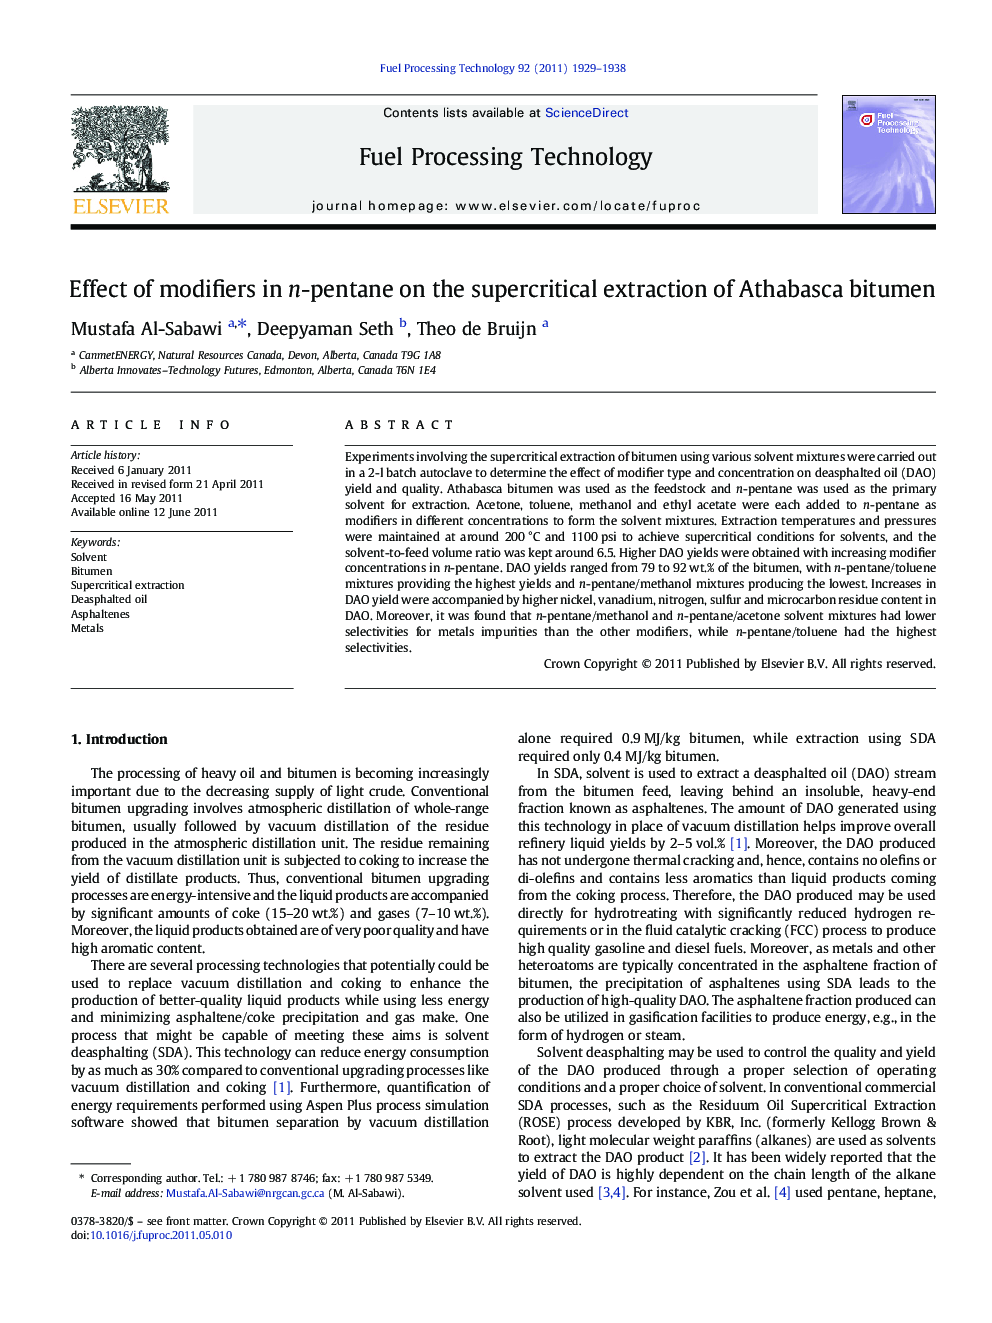 Effect of modifiers in n-pentane on the supercritical extraction of Athabasca bitumen